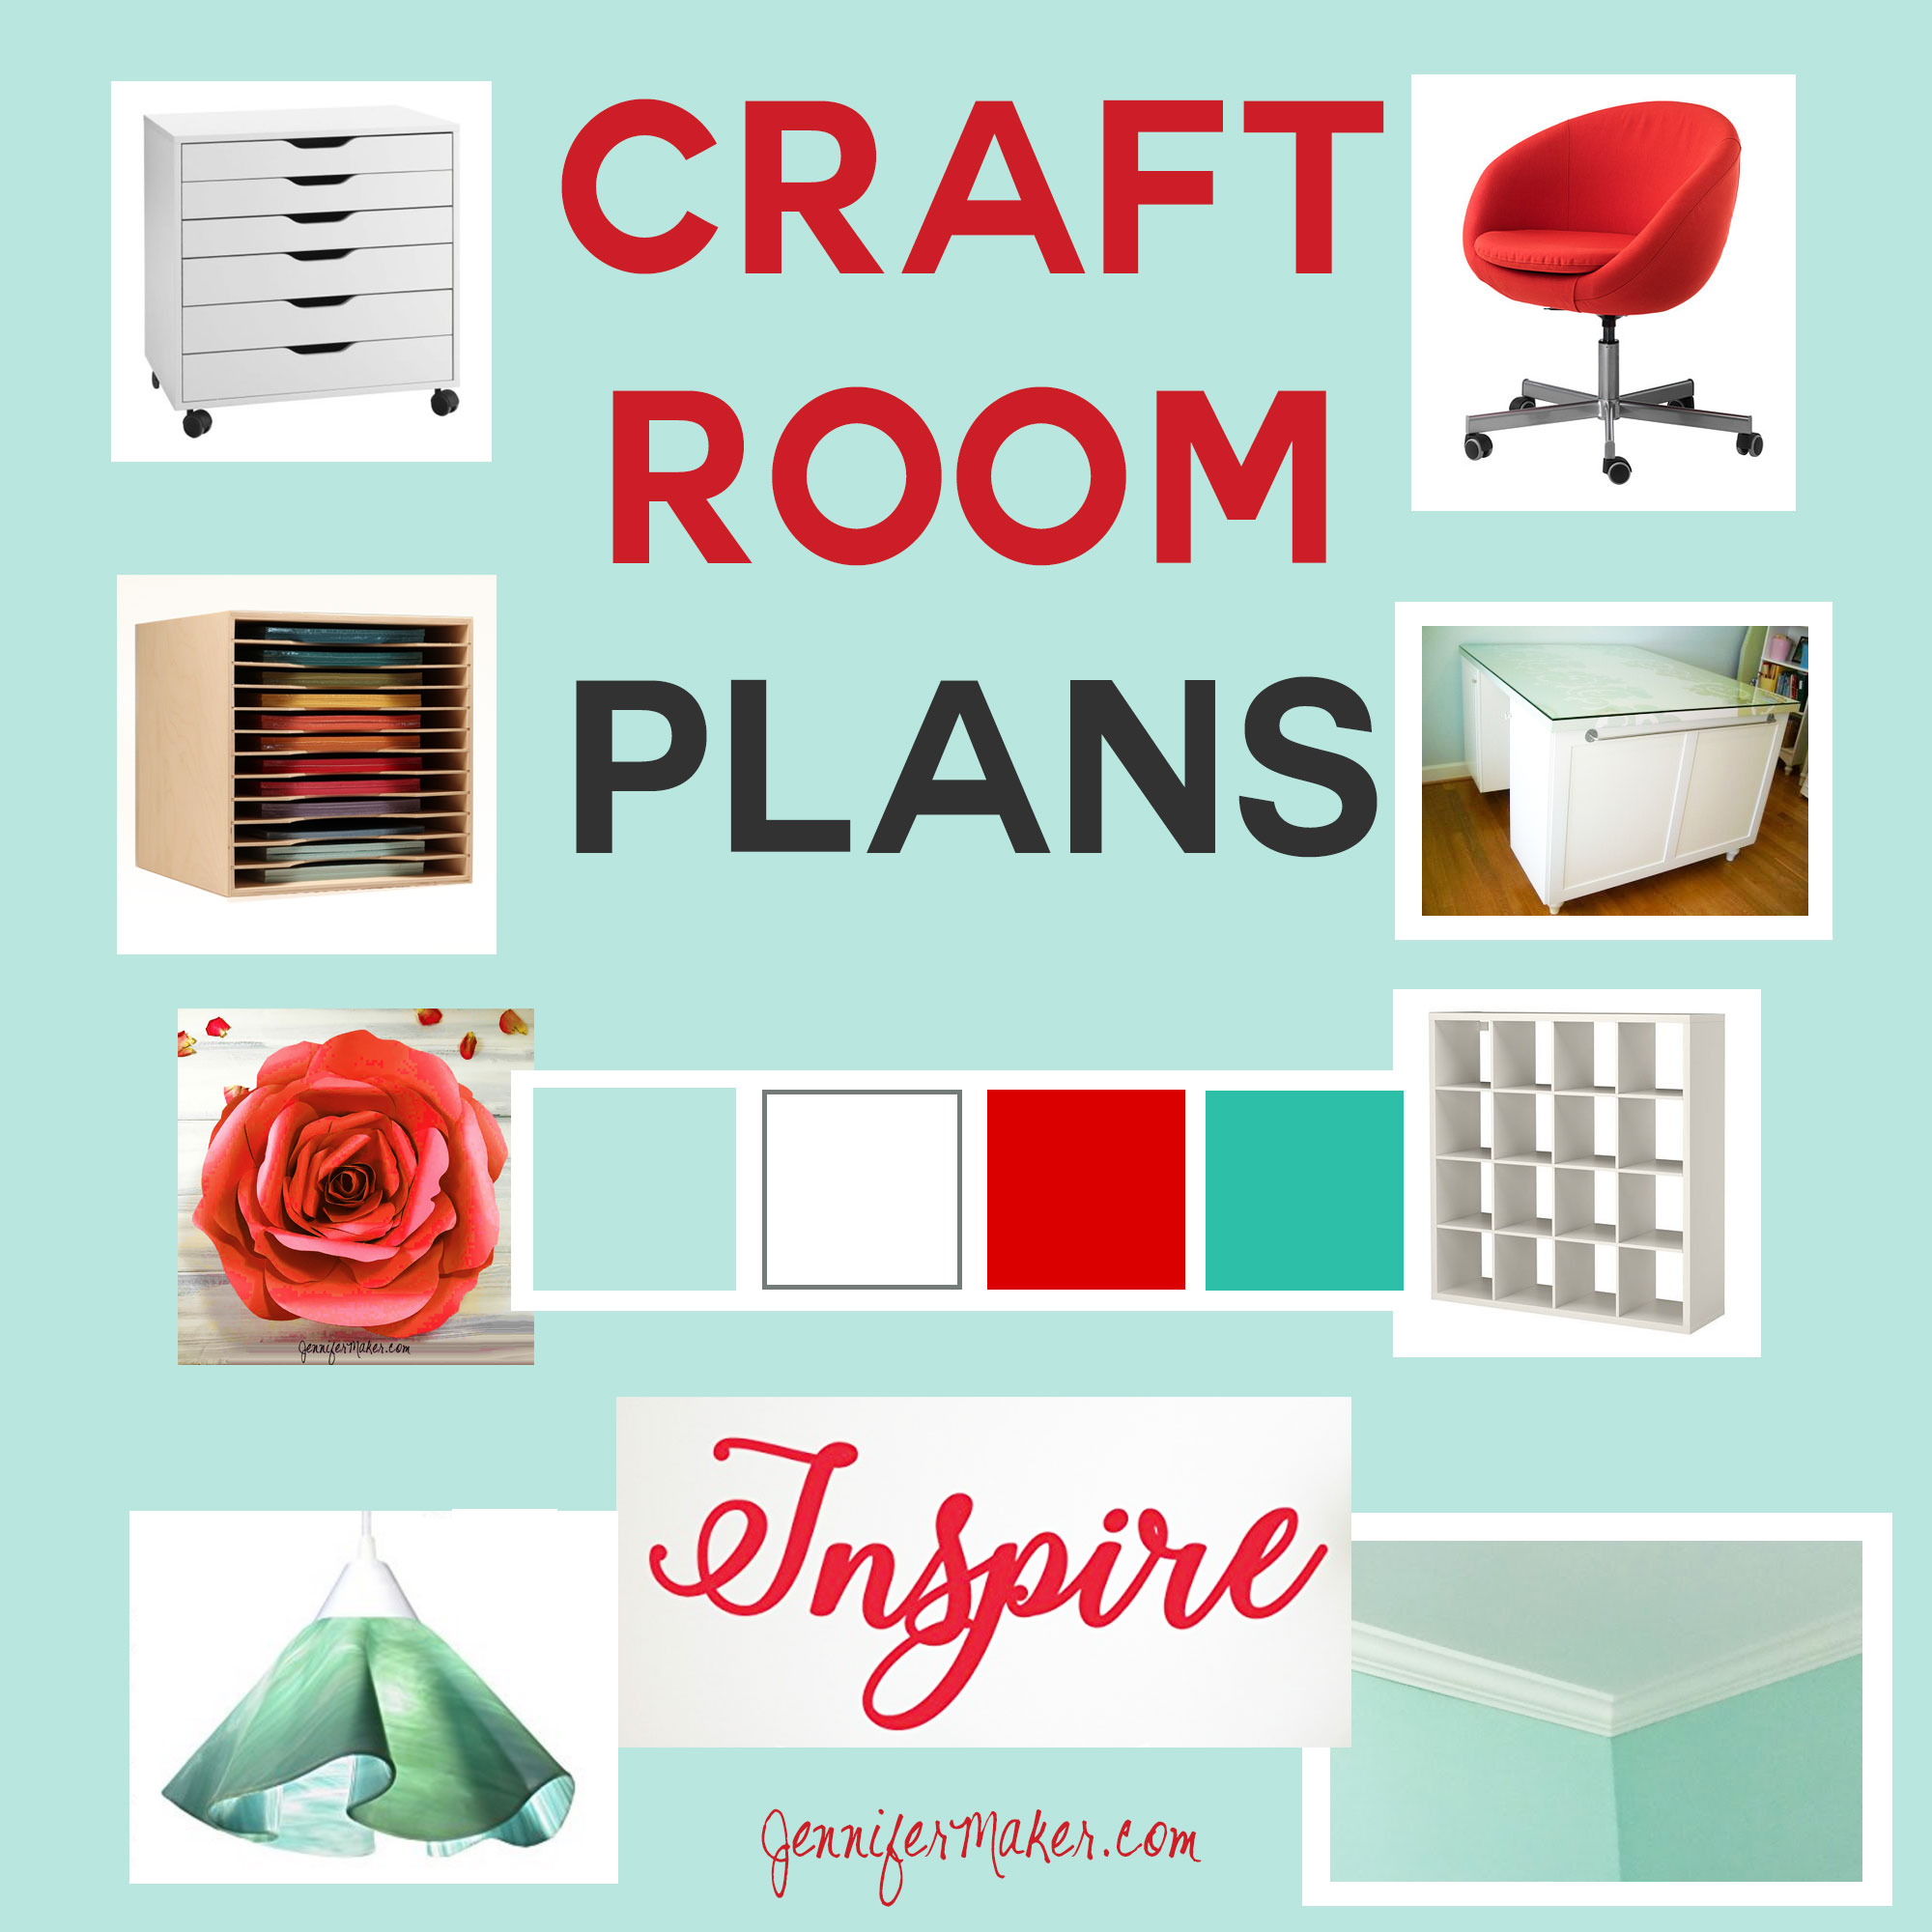 See this craft blogger's plans for the ultimate (yet inexpensive) craft room renovation with a vintage industrial feel!